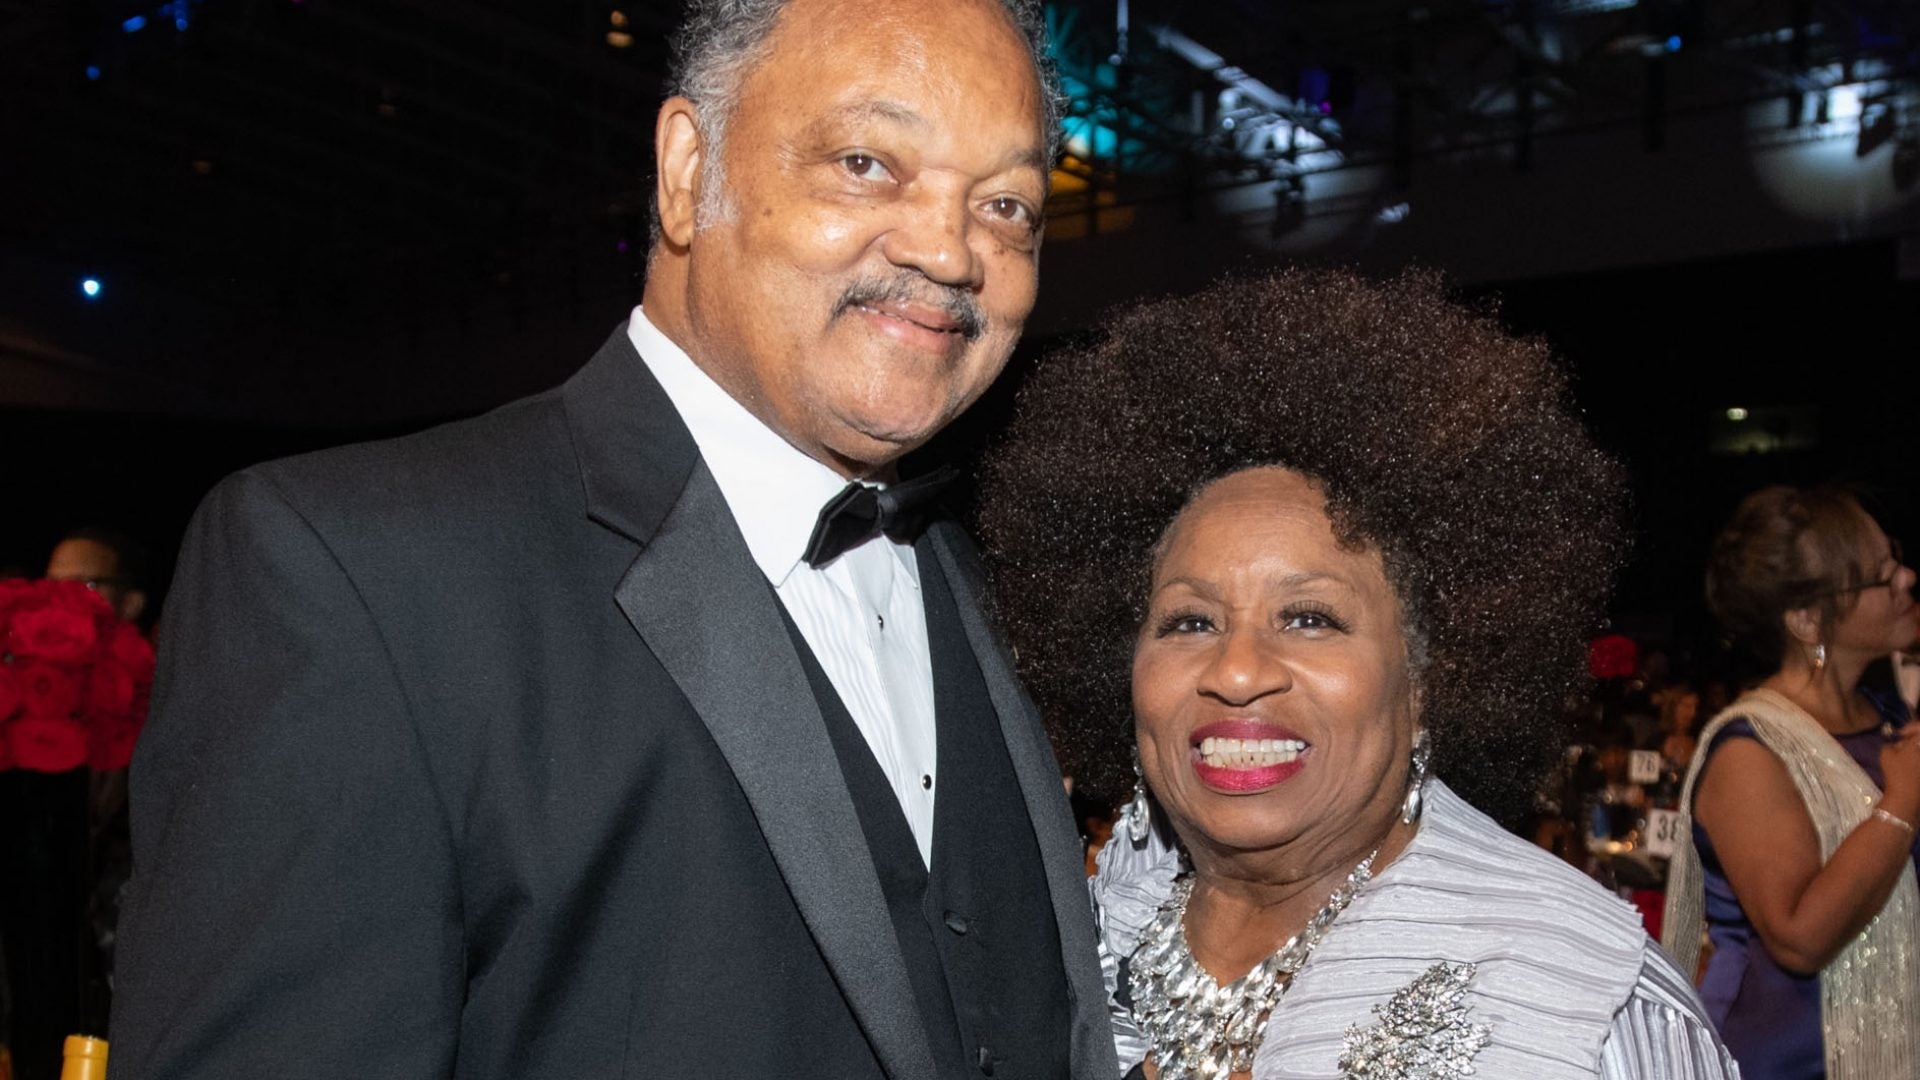 Rev. Jesse Jackson And Wife Jacqueline Released From Hospital After Treatment For COVID-19